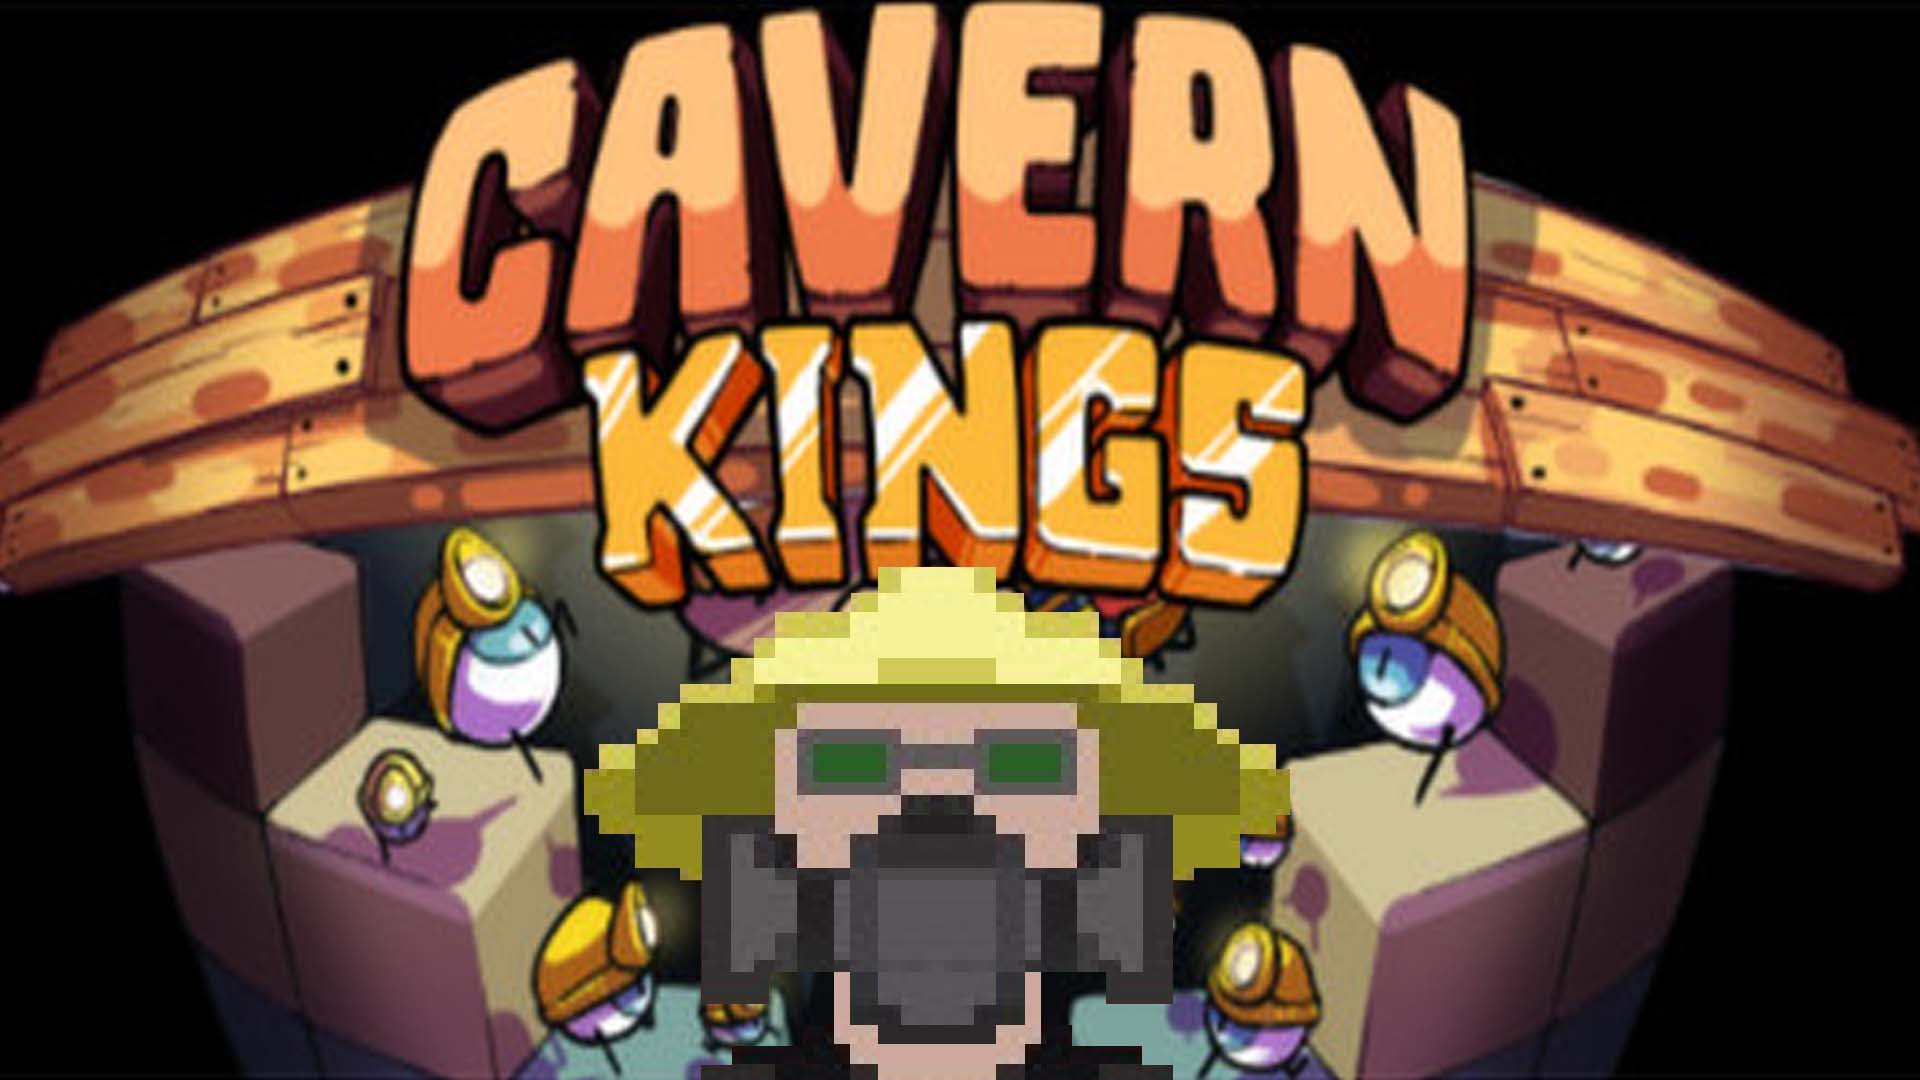 Cavern Kings Backgrounds, Compatible - PC, Mobile, Gadgets| 1920x1080 px